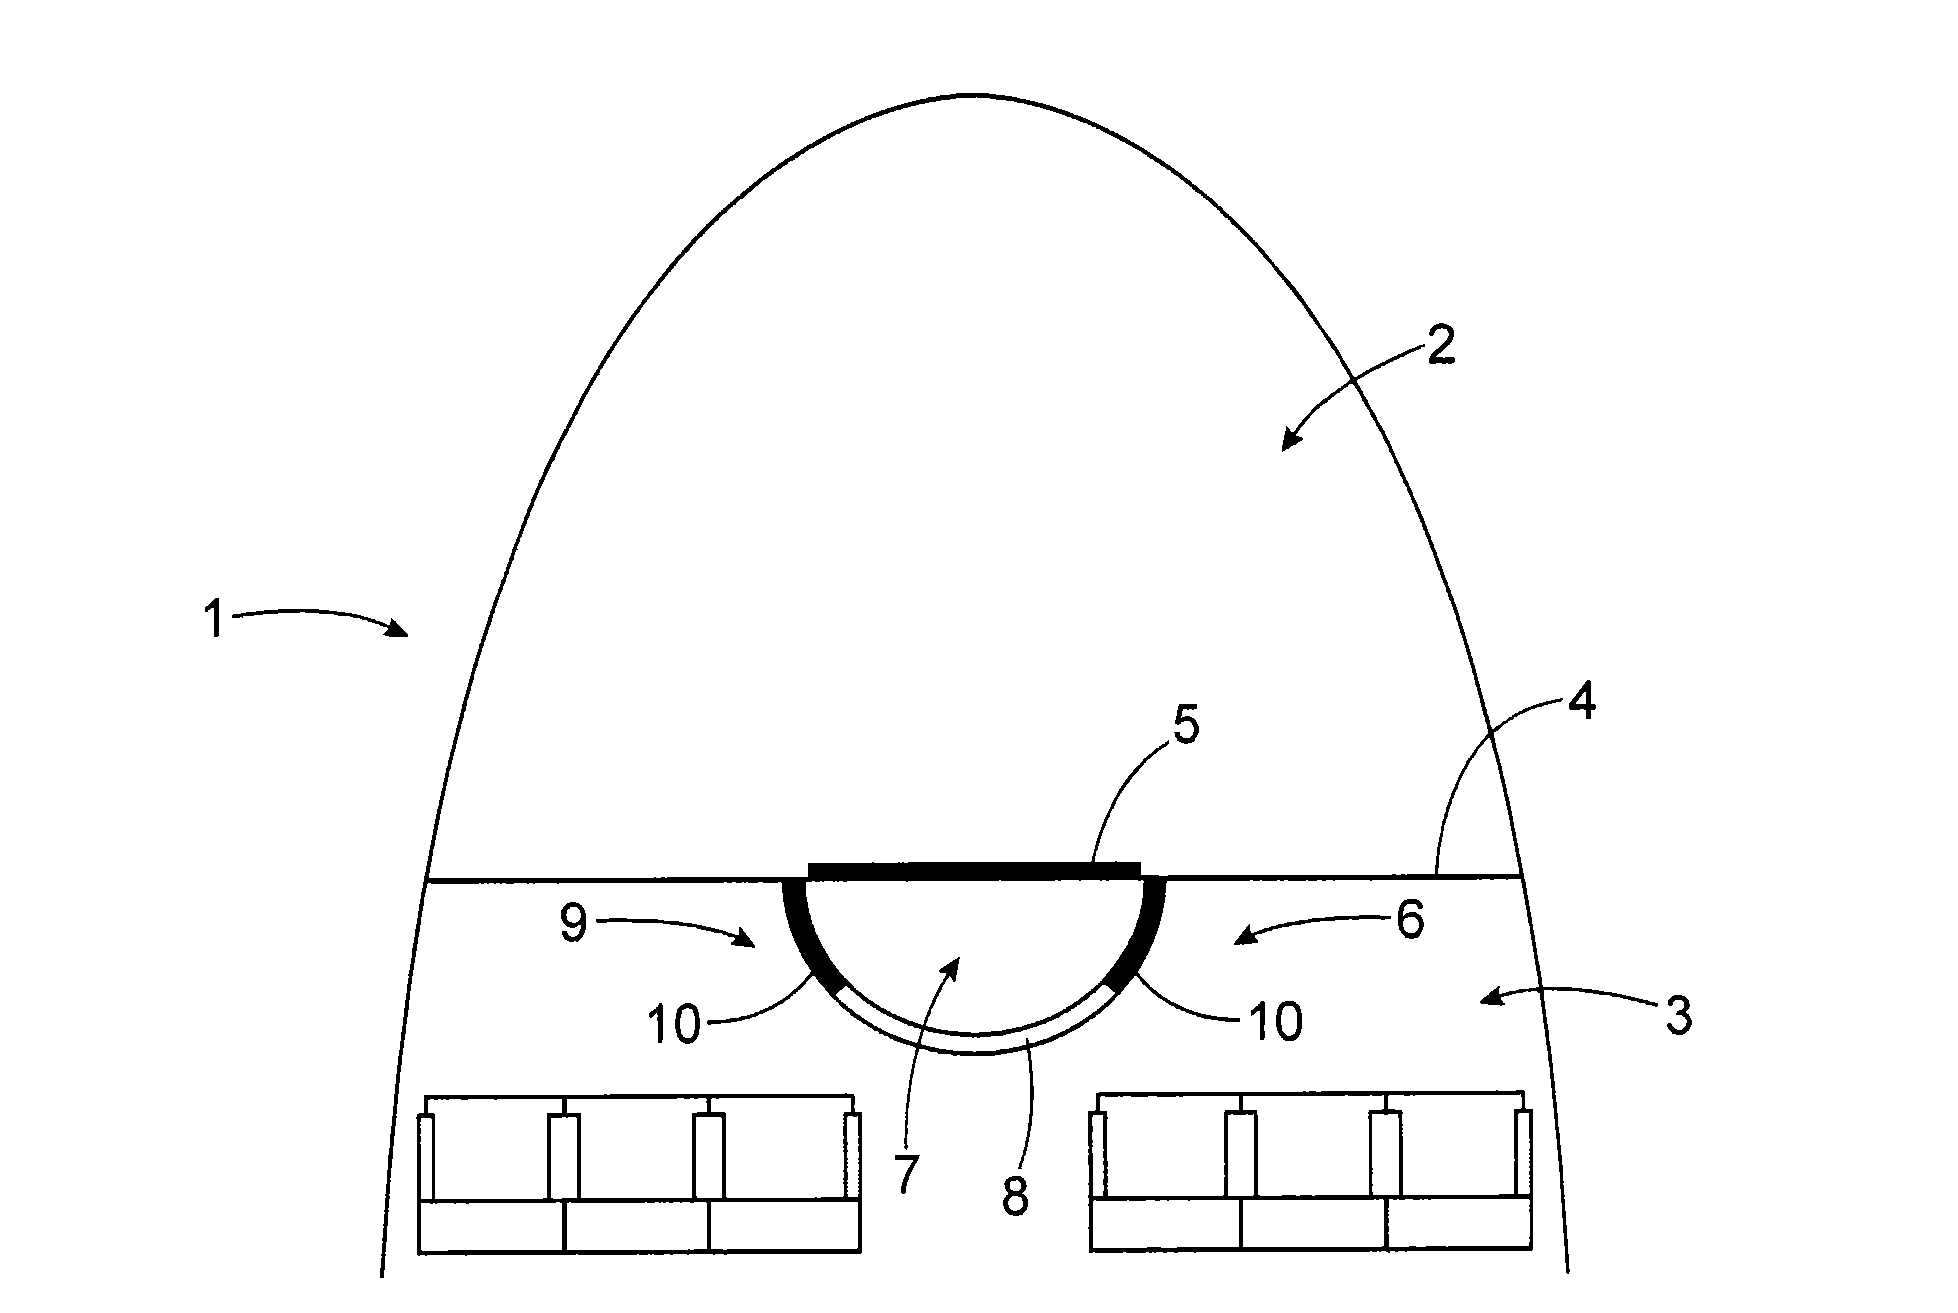 Aircraft nose section including a lock for accessing the cockpit